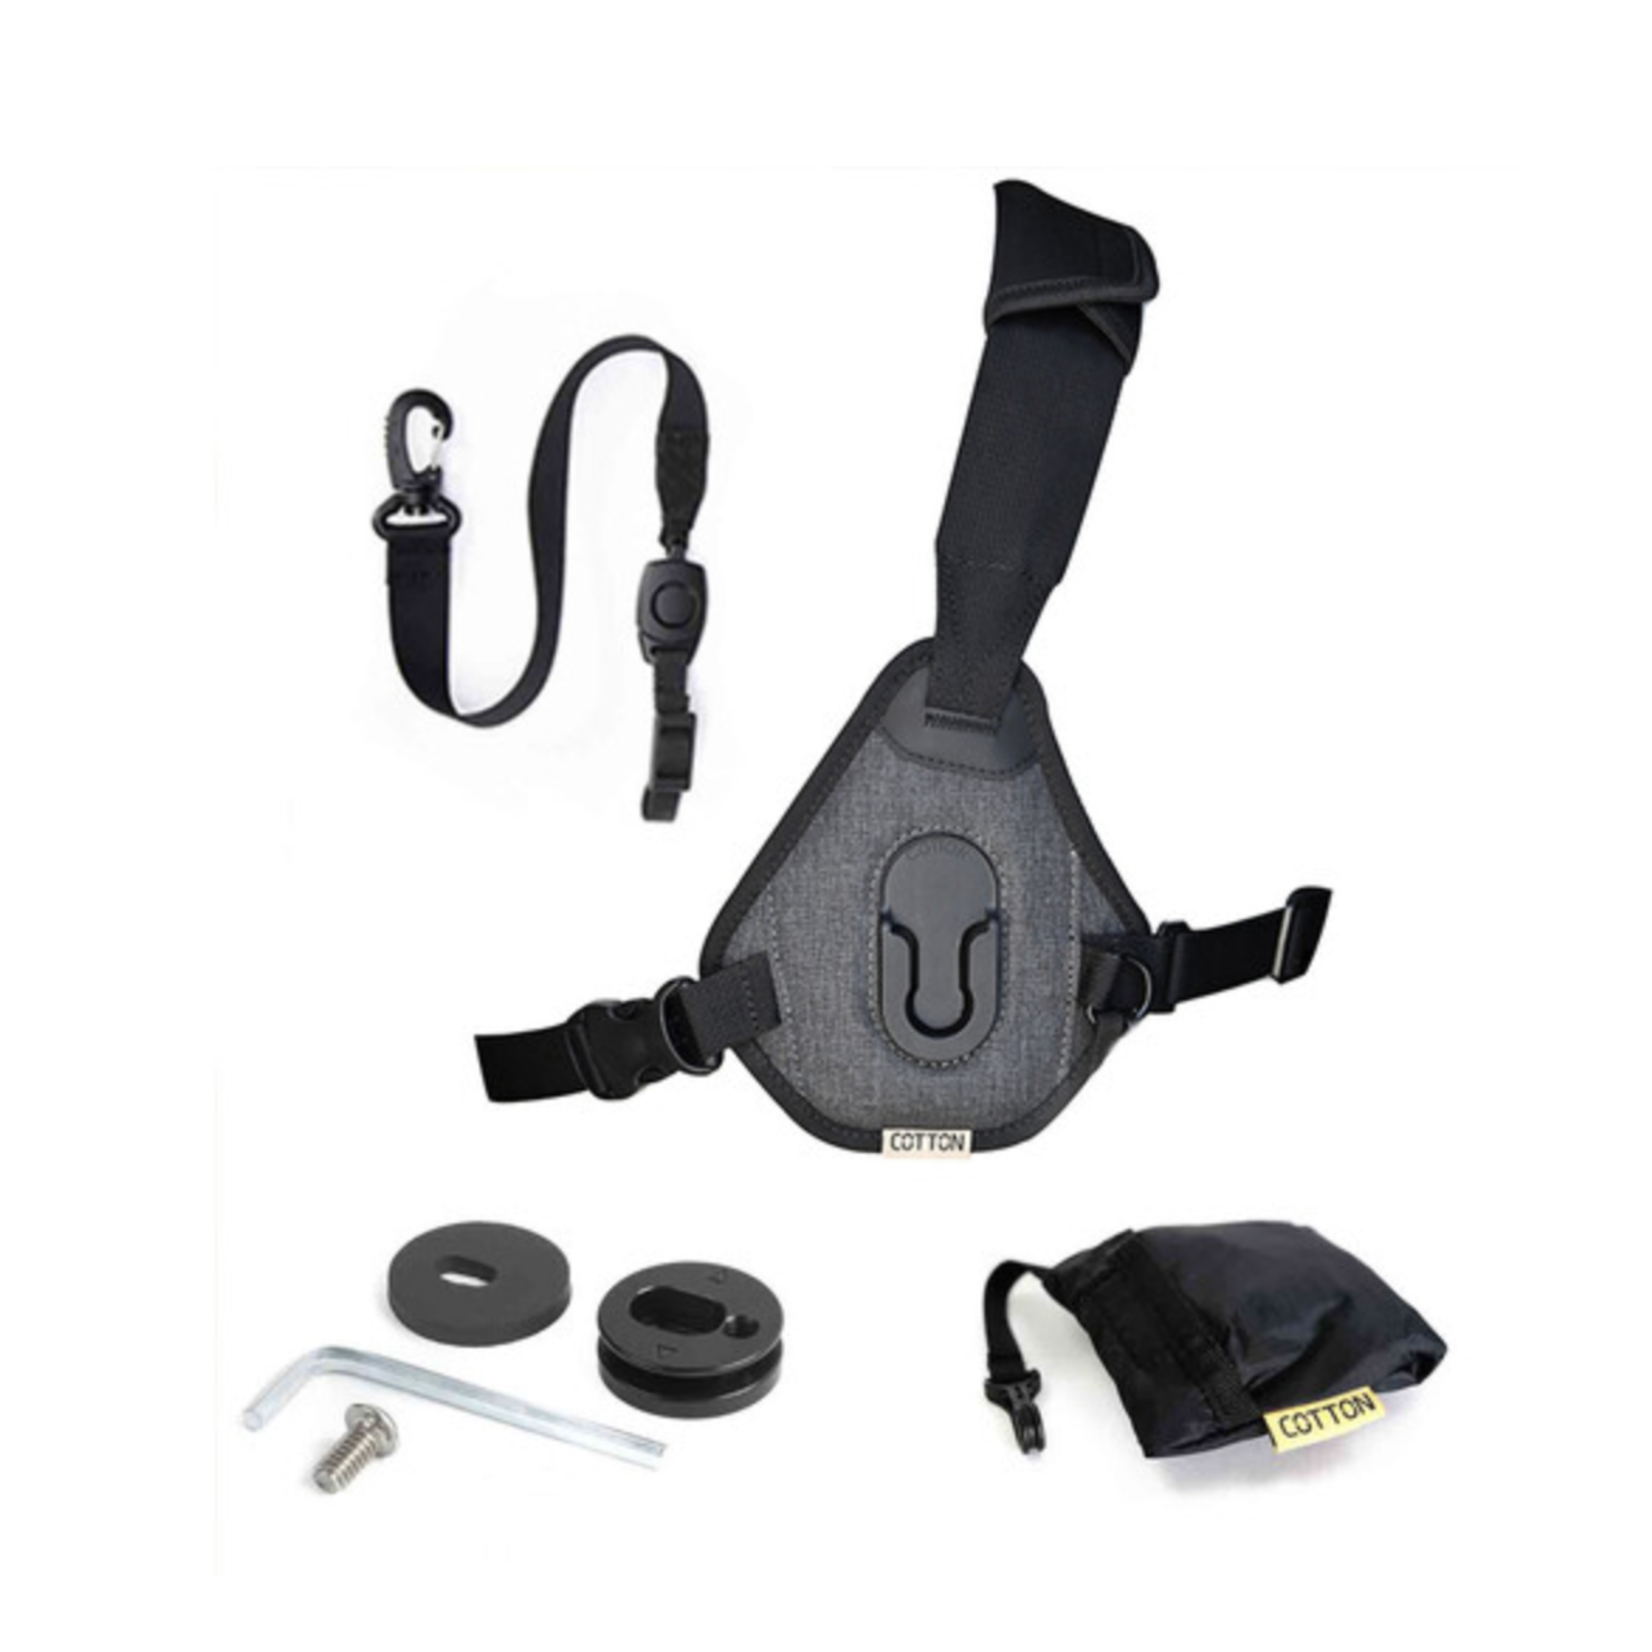 Cotton Cotton Carrier Skout G2 Sling-Style Camera Harness (Gray)